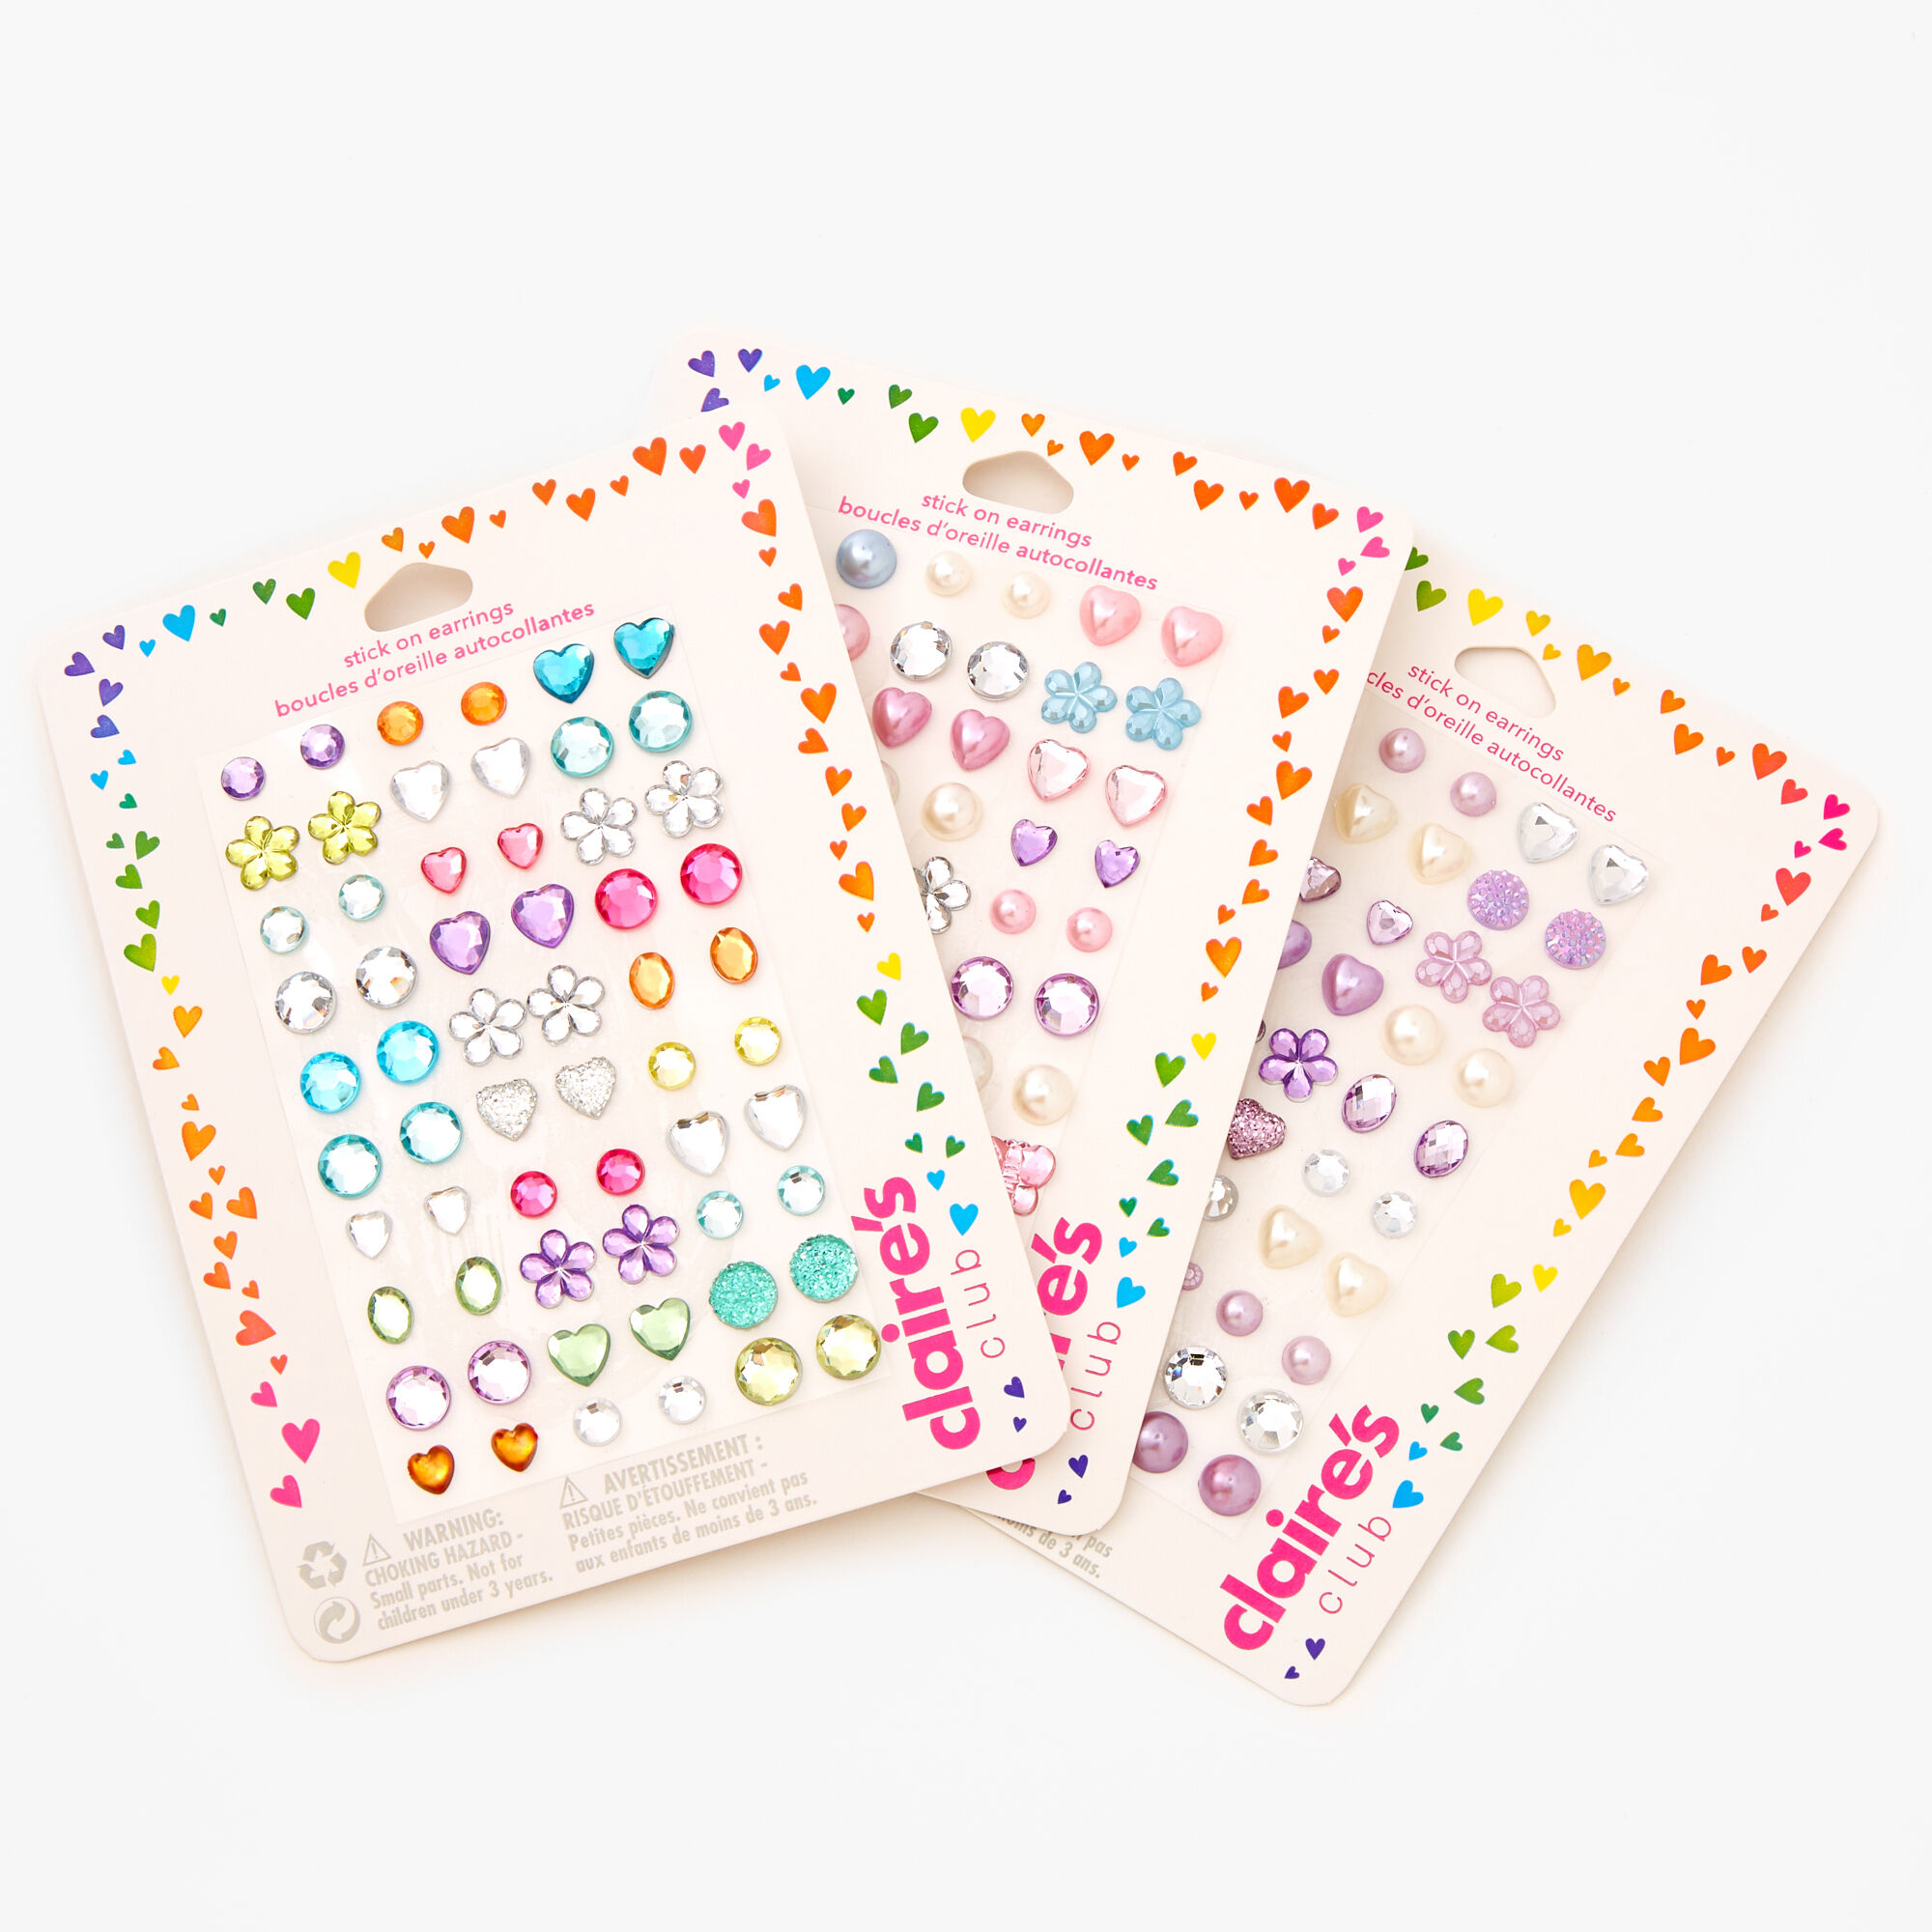 Claire's Club Stick On Earrings Bundle - 3 Pack